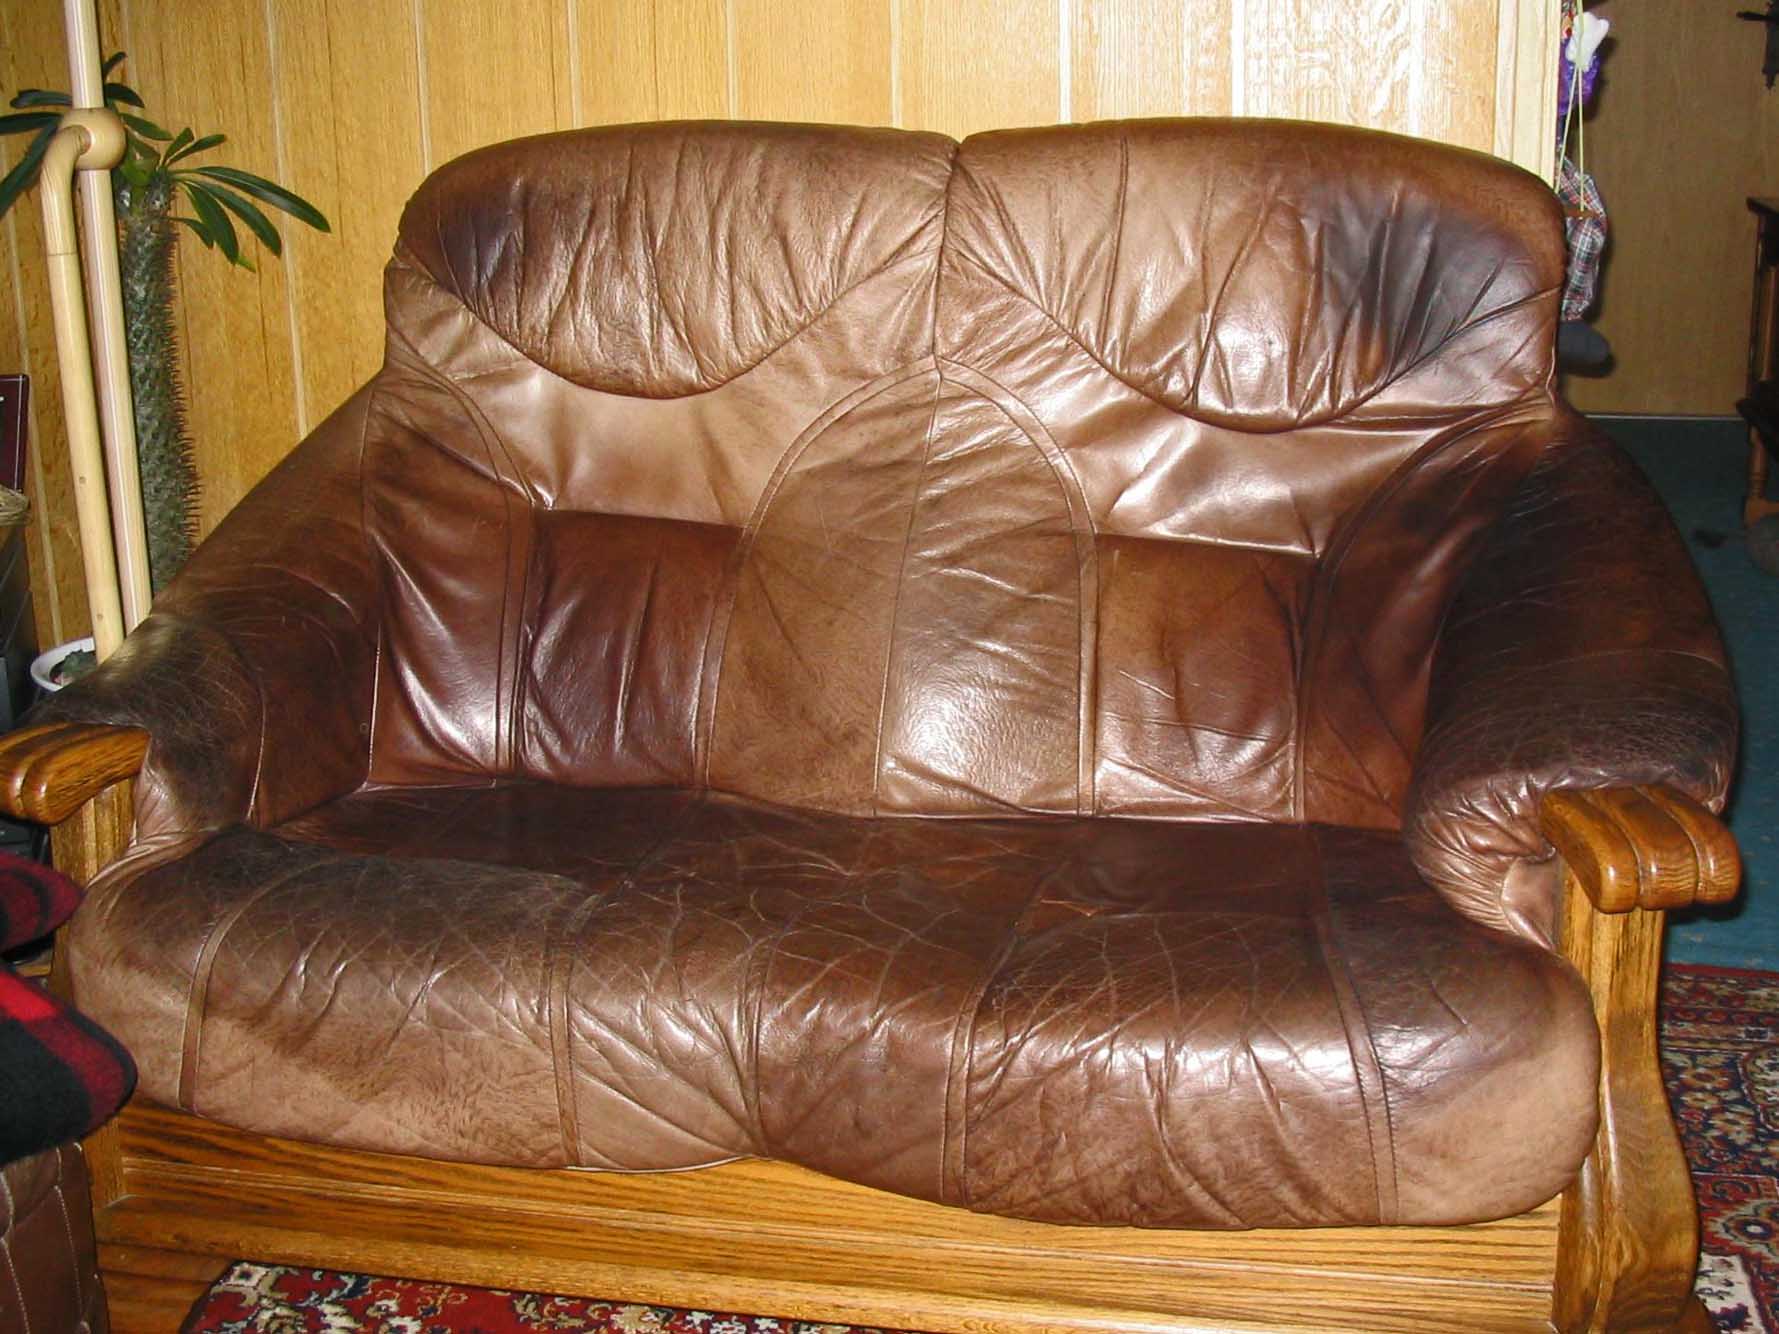 How To Remove Head Grease From Leather Sofa